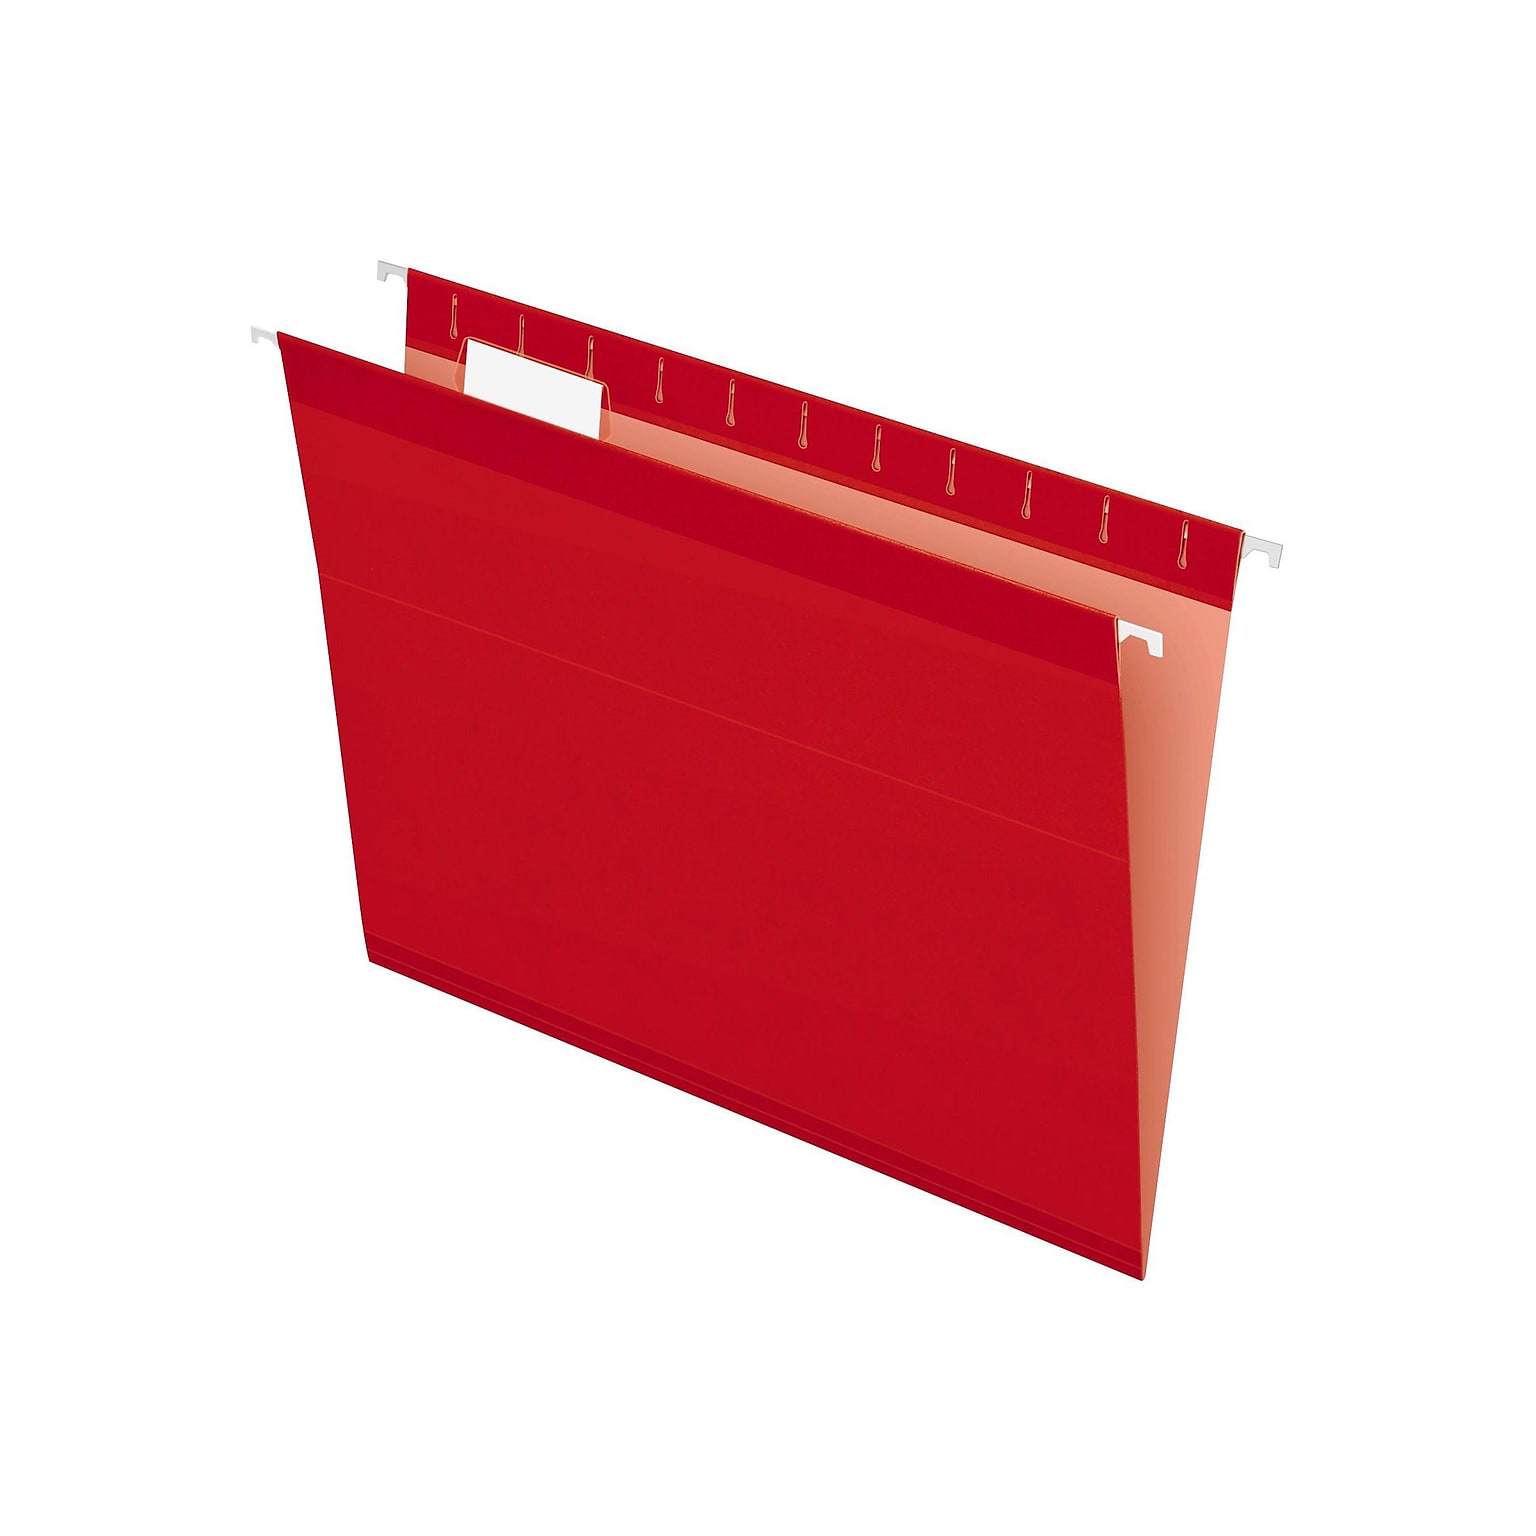 Pendaflex Reinforced Hanging File Folders, 1/5 Tab, Letter Size, Red, 25/Box (PFX4152 1/5 RED)